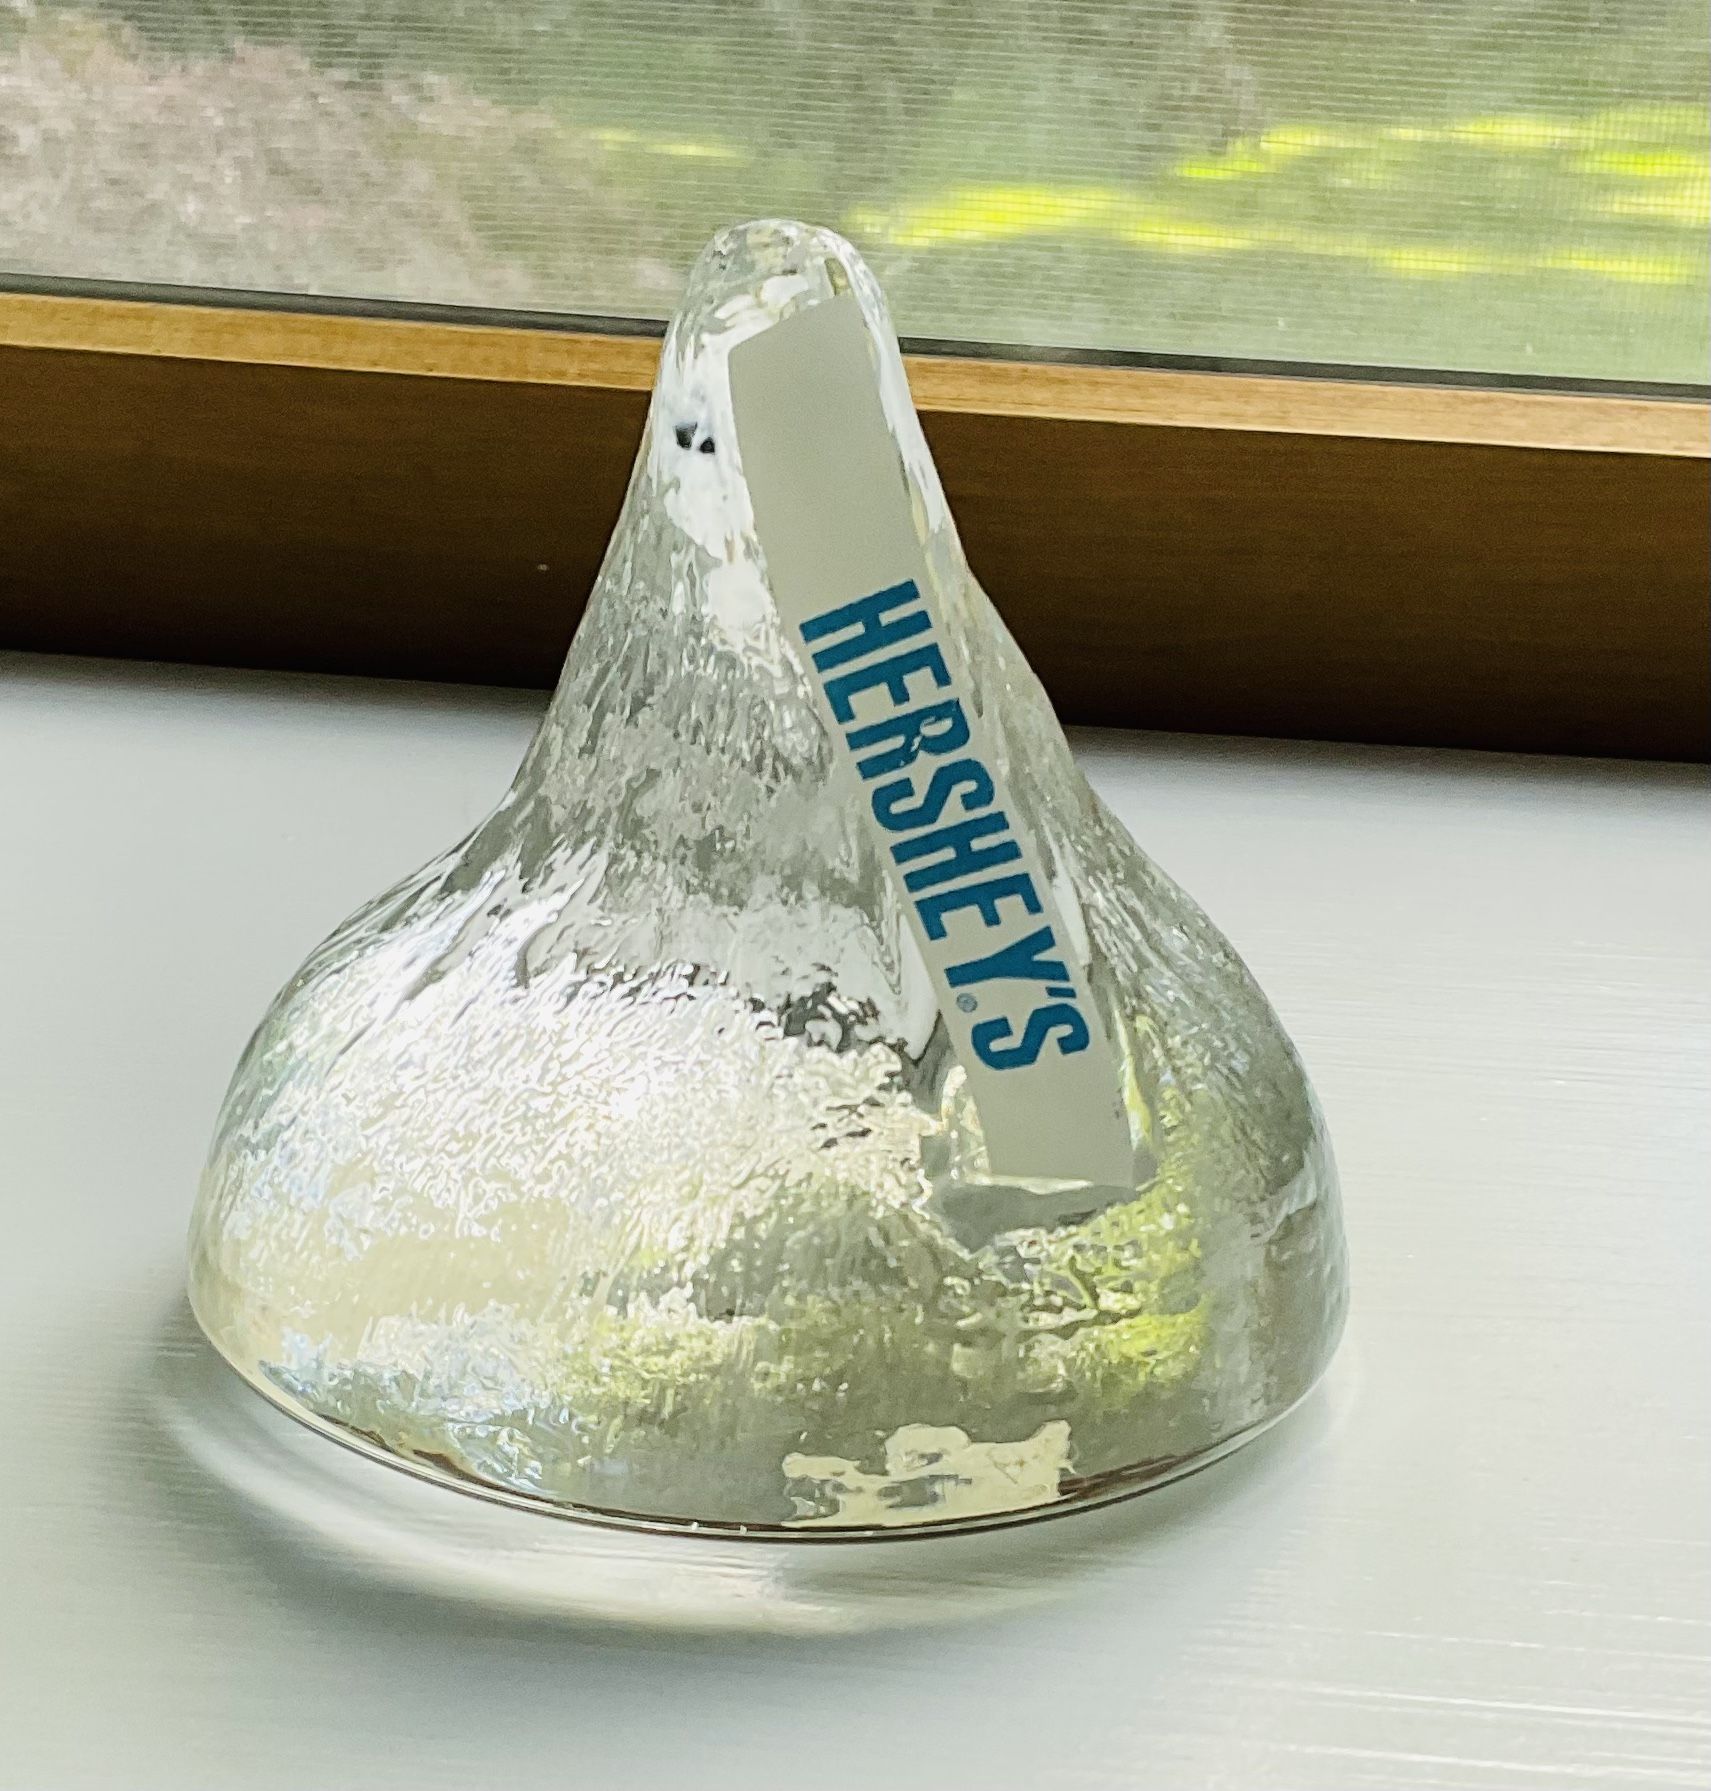 VINTAGE HERSHEY'S KISS CRYSTAL GLASS PAPERWEIGHT BY GLASSWORKS, WEST VIRGINIA, 3.5” x 3.5” 